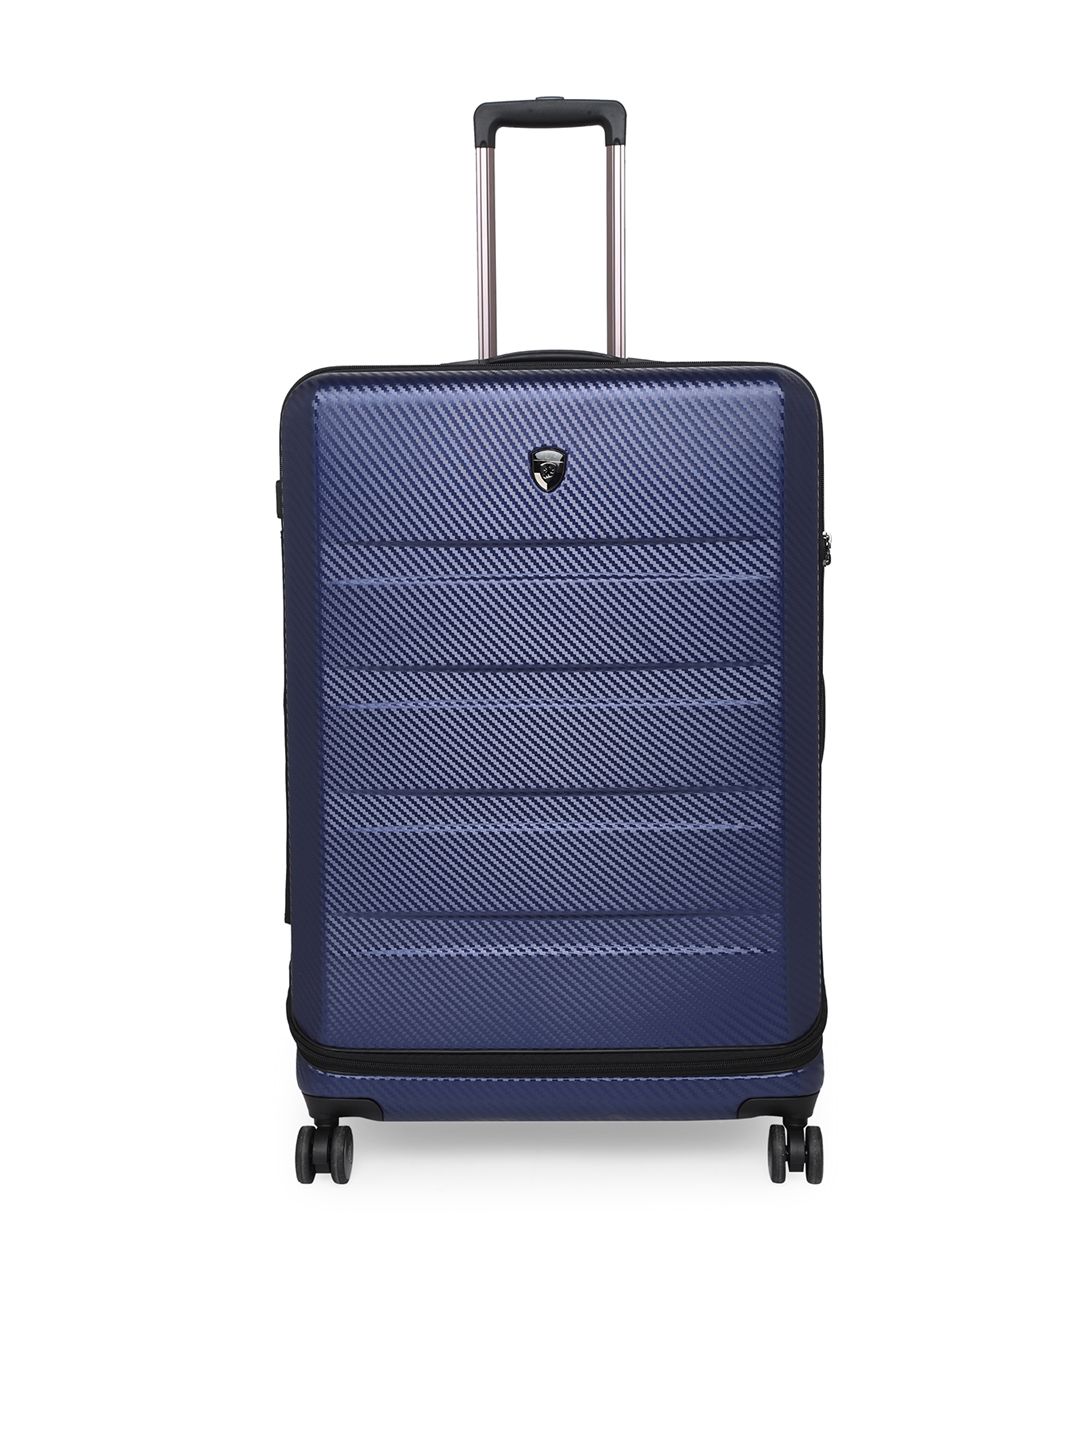 Heys Navy Blue Textured Hard-Sided Large Trolley Suitcase Price in India